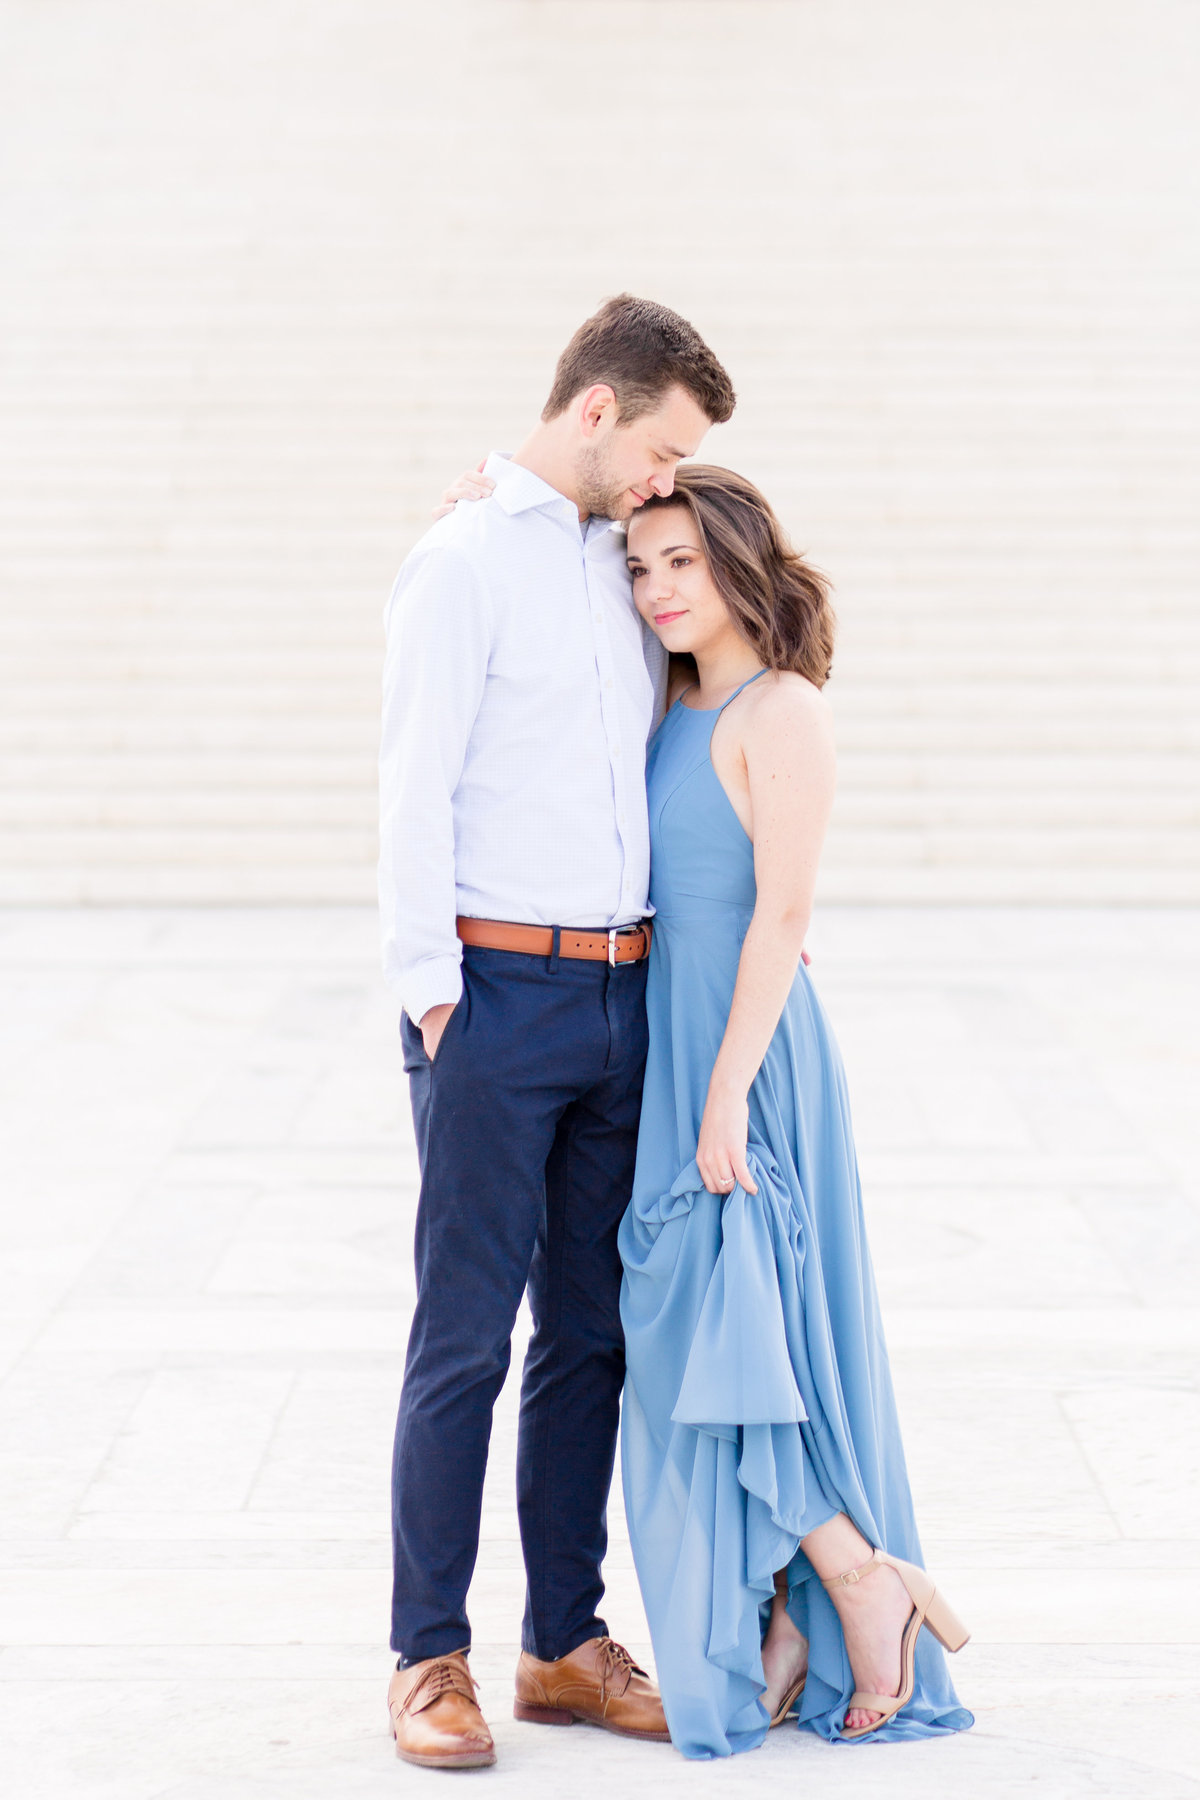 Deanna & Grant | Capital Building Engagement Session | DC Wedding Photographer | Taylor Rose Photography-37